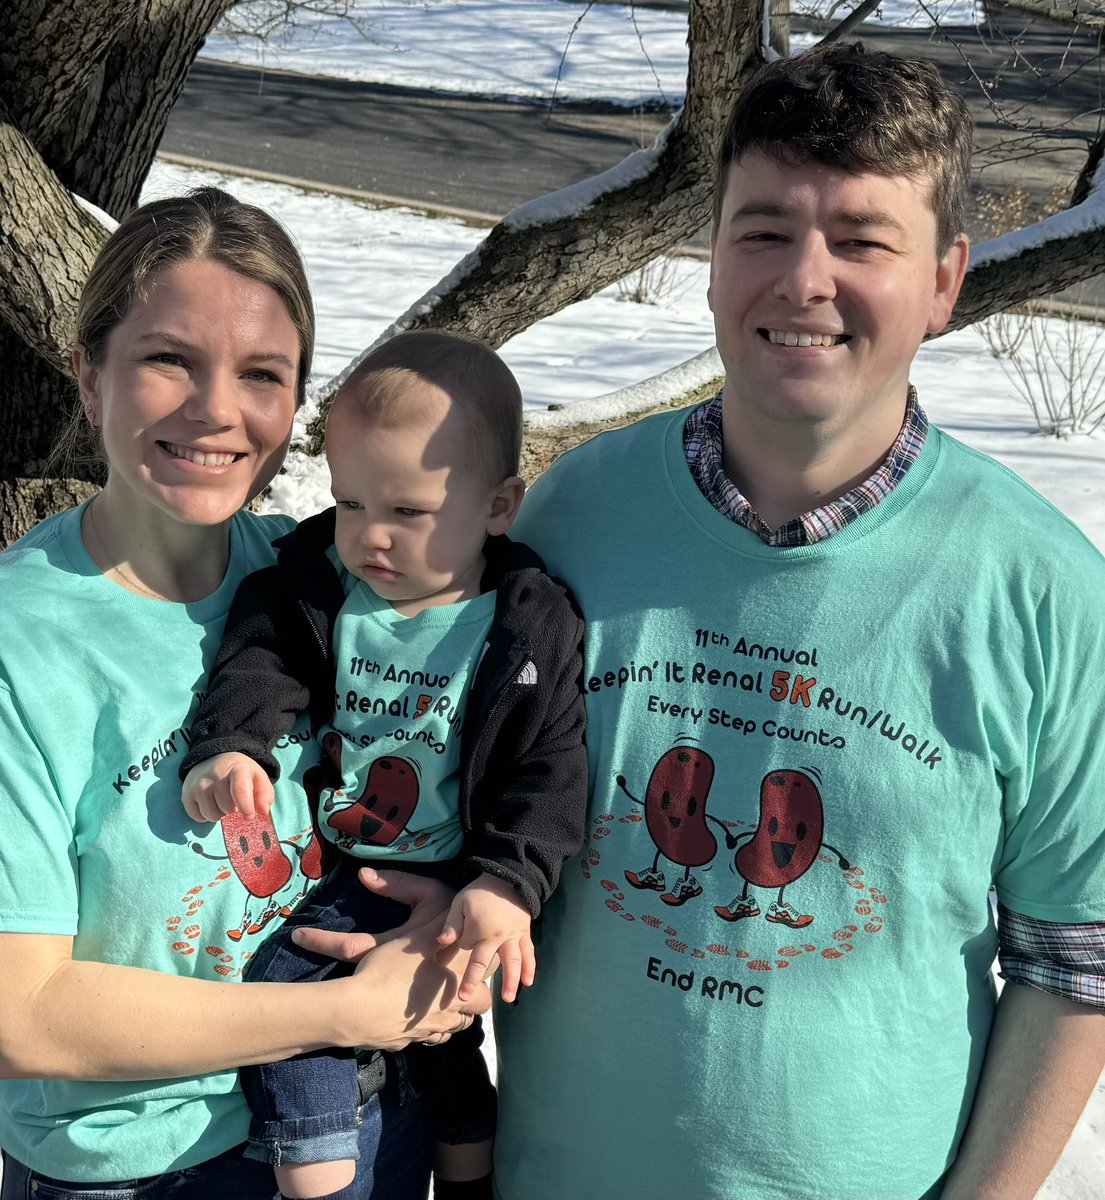 Representing snowy Wisconsin for the 11th RMC walk.  Lots of advancing being made and happy to be part of the effort finding a cure!! @renalmedullary @PavlosMsaouel @KidneyCancer @wiscurology @WiscUroOnc @SUO_YUO @UroOnc @LabGenovese